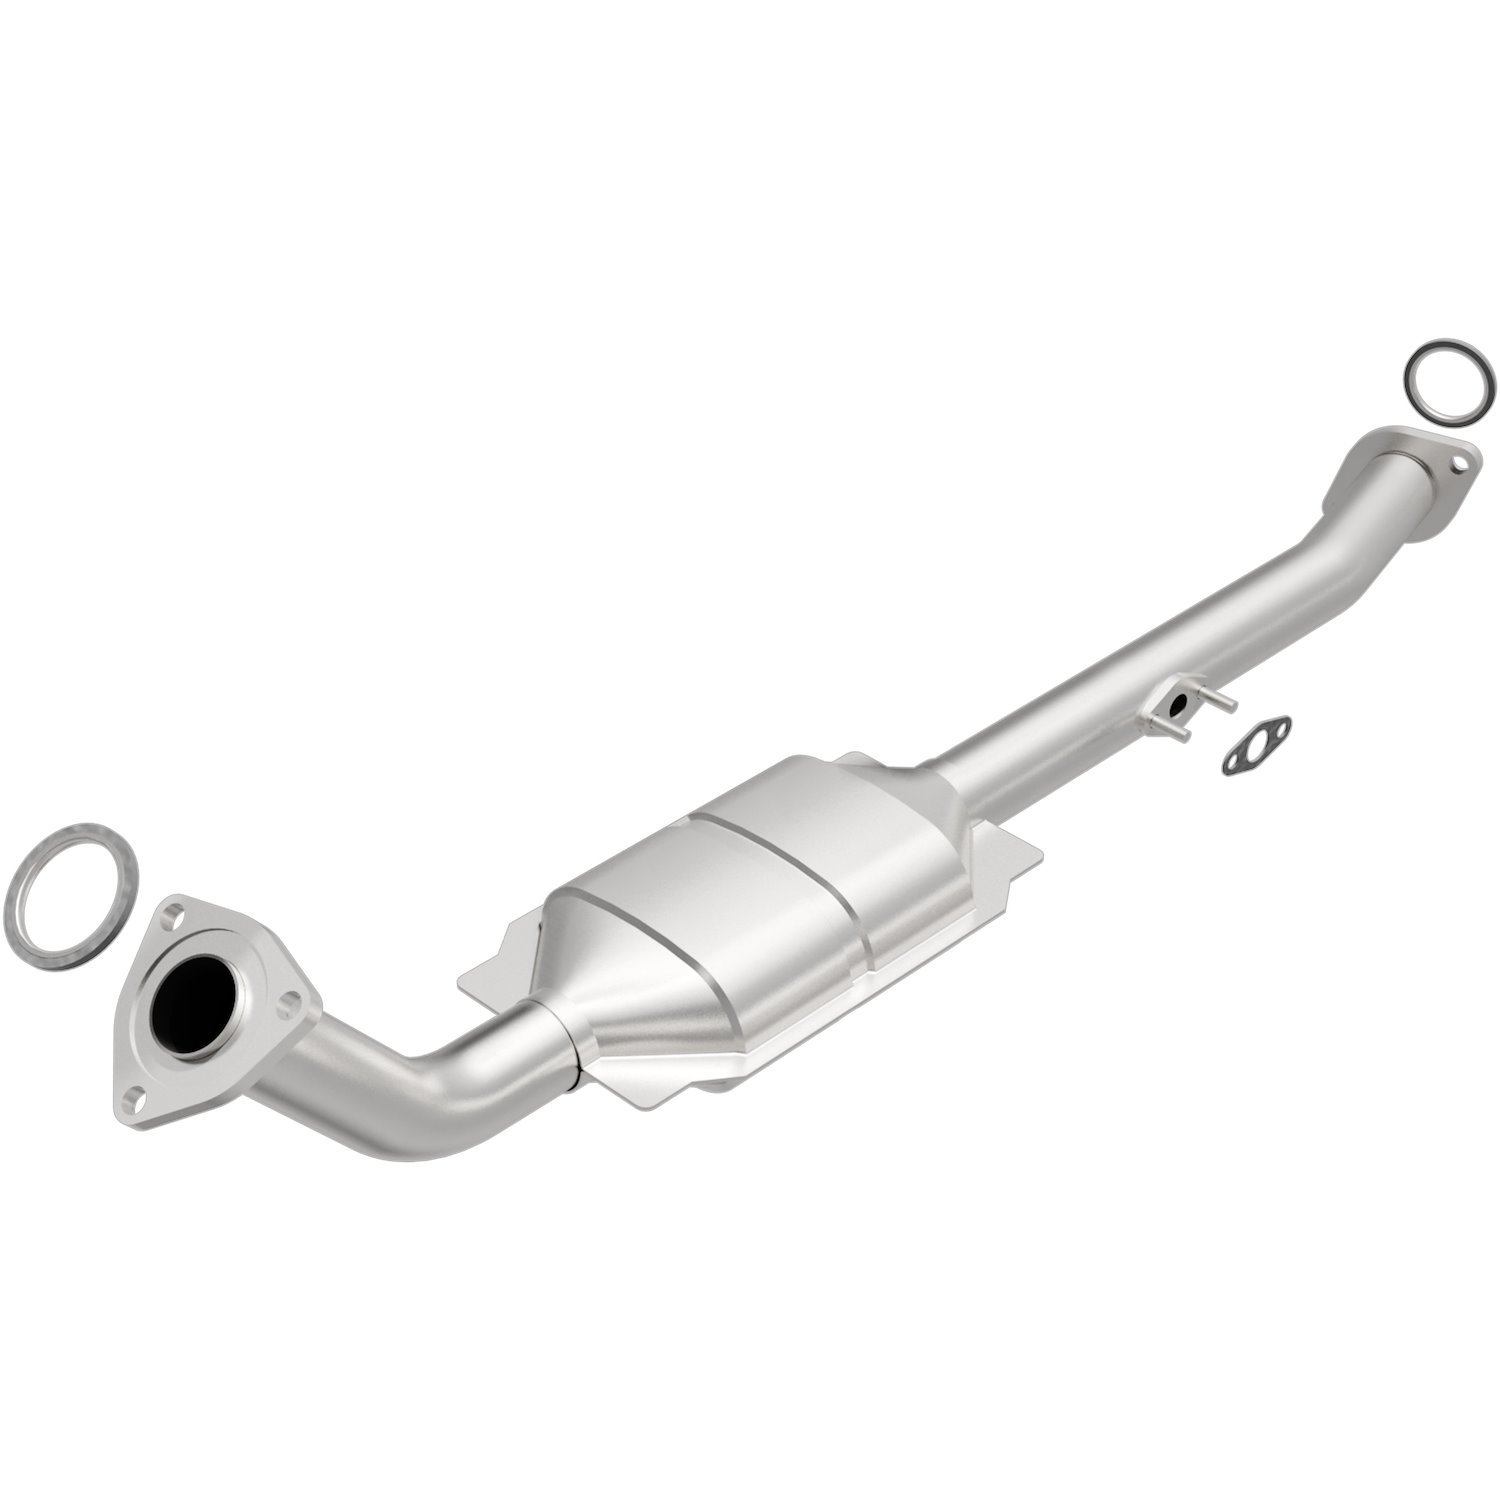 2001-2004 Toyota Sequoia HM Grade Federal / EPA Compliant Direct-Fit Catalytic Converter